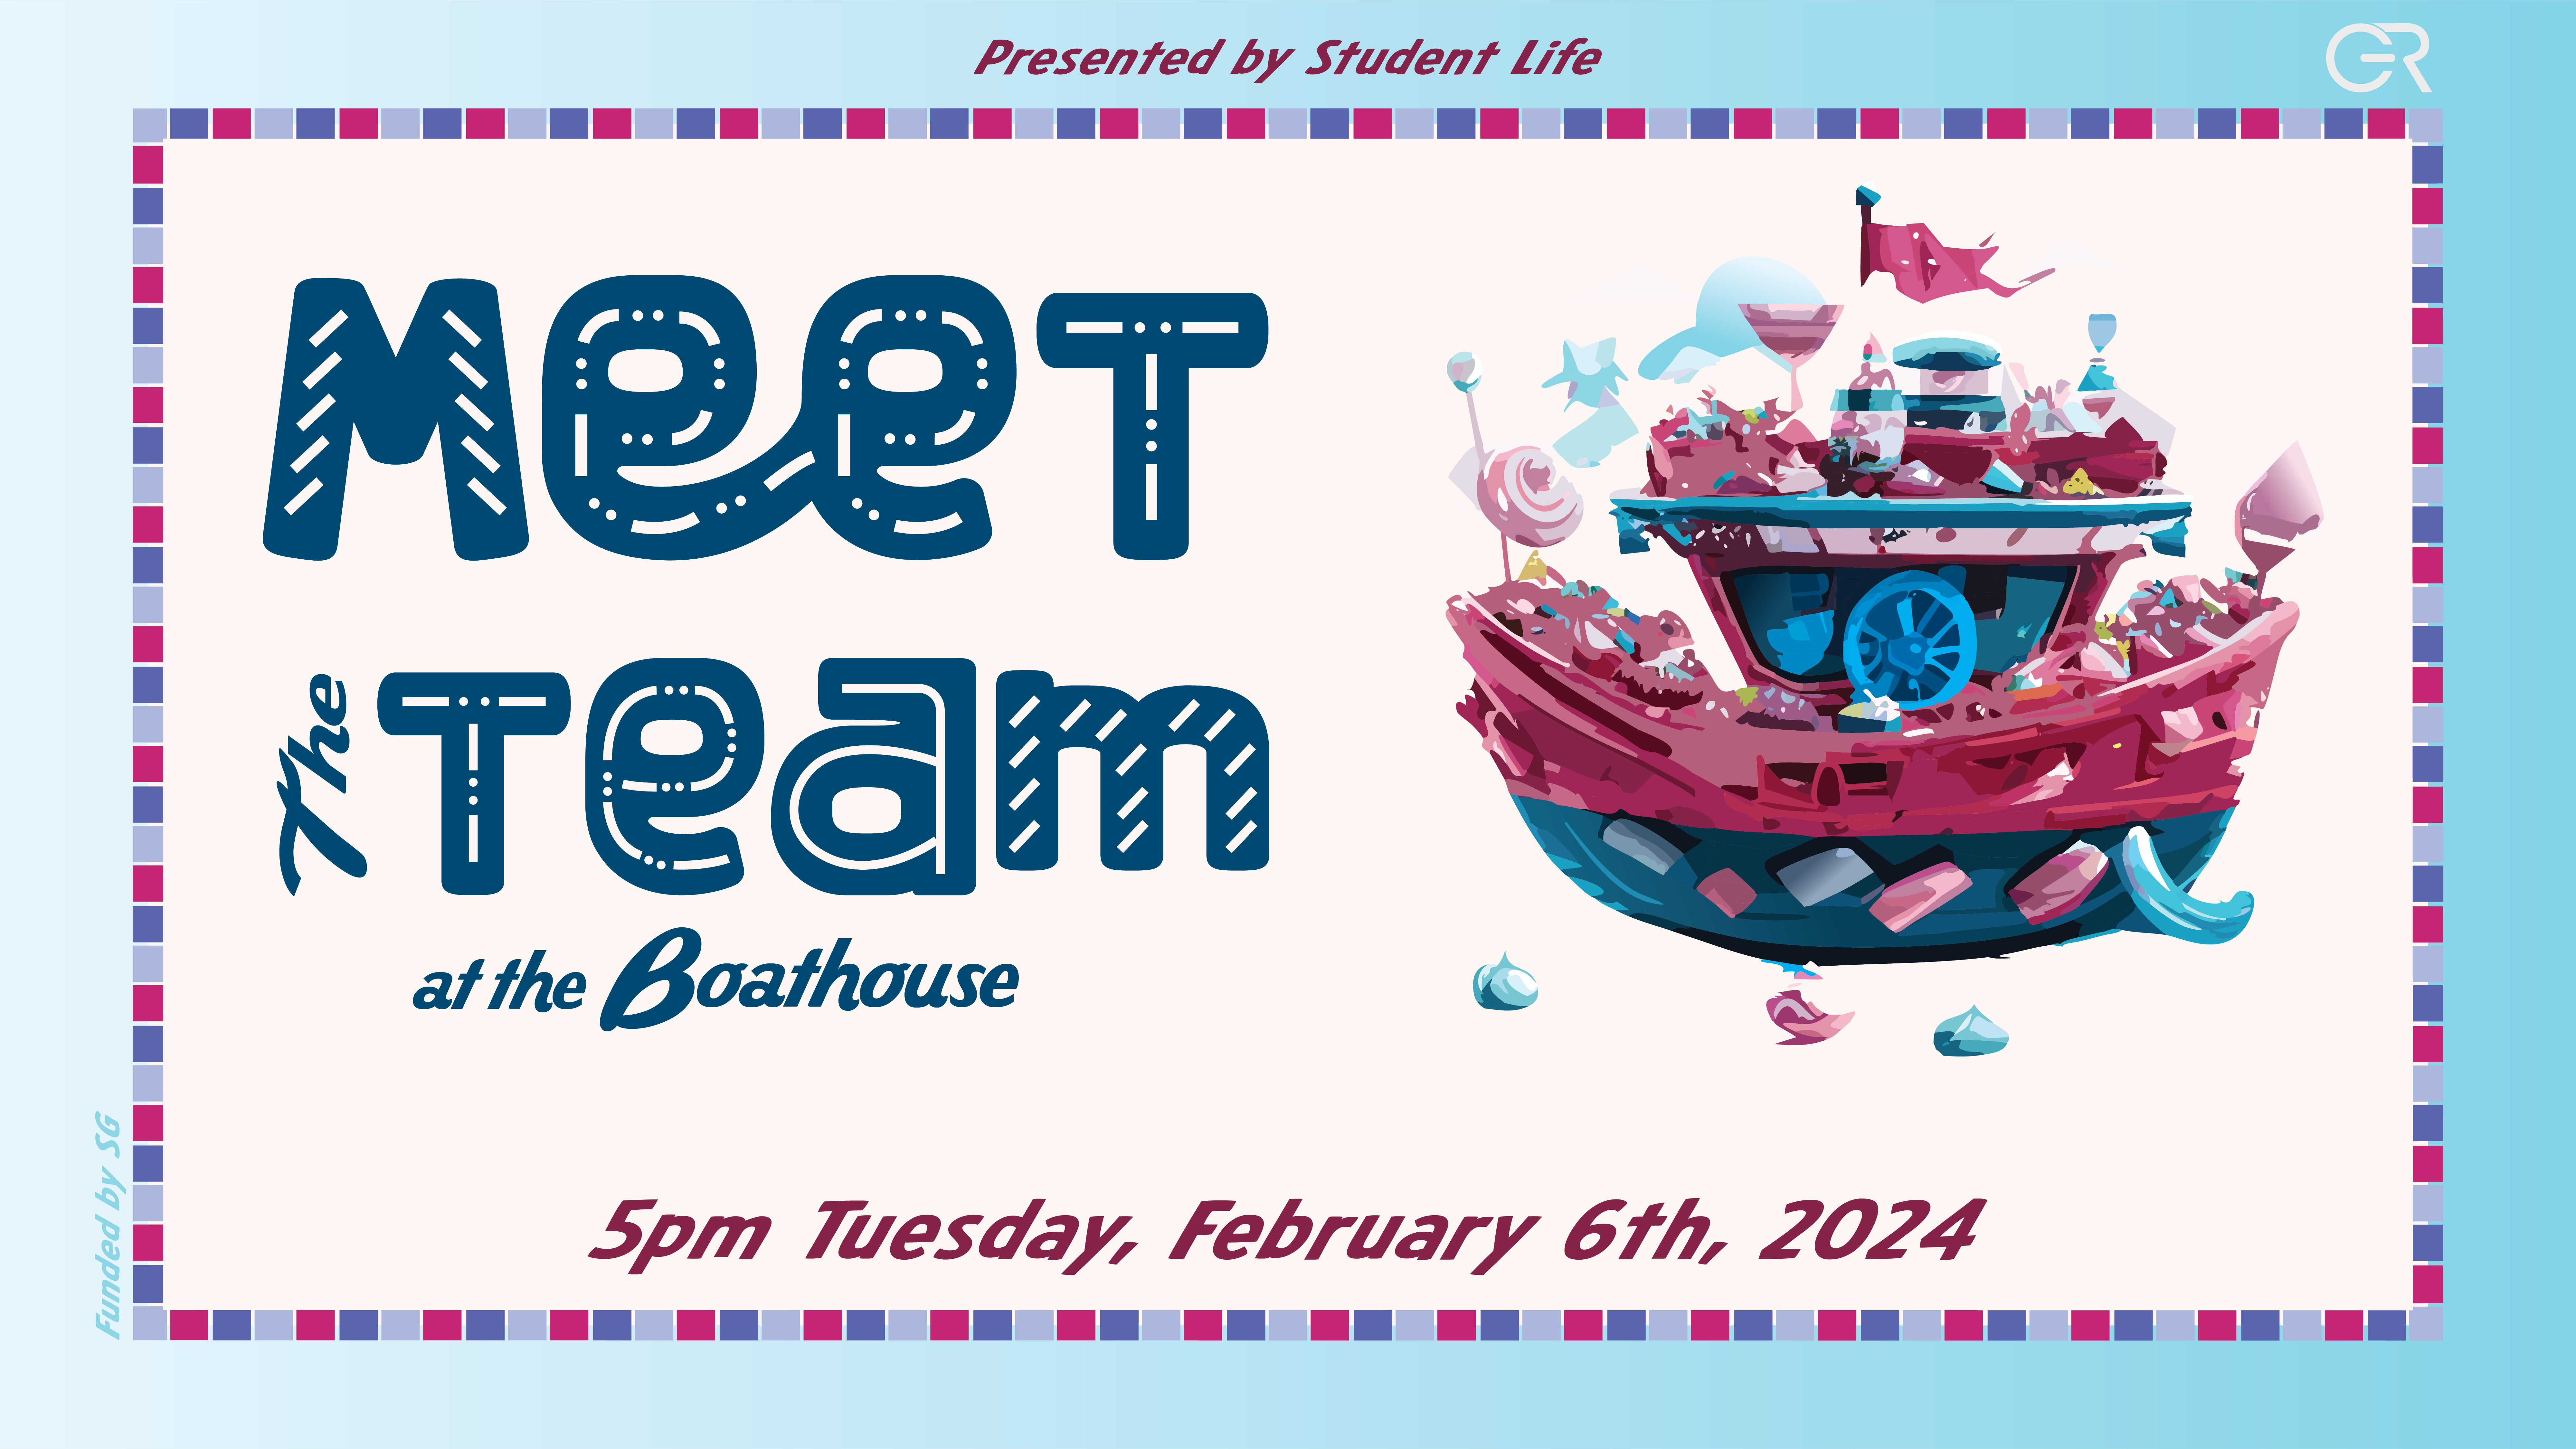 Meet the Team at the Boathouse. Tuesday, February 6 at 5 p.m.